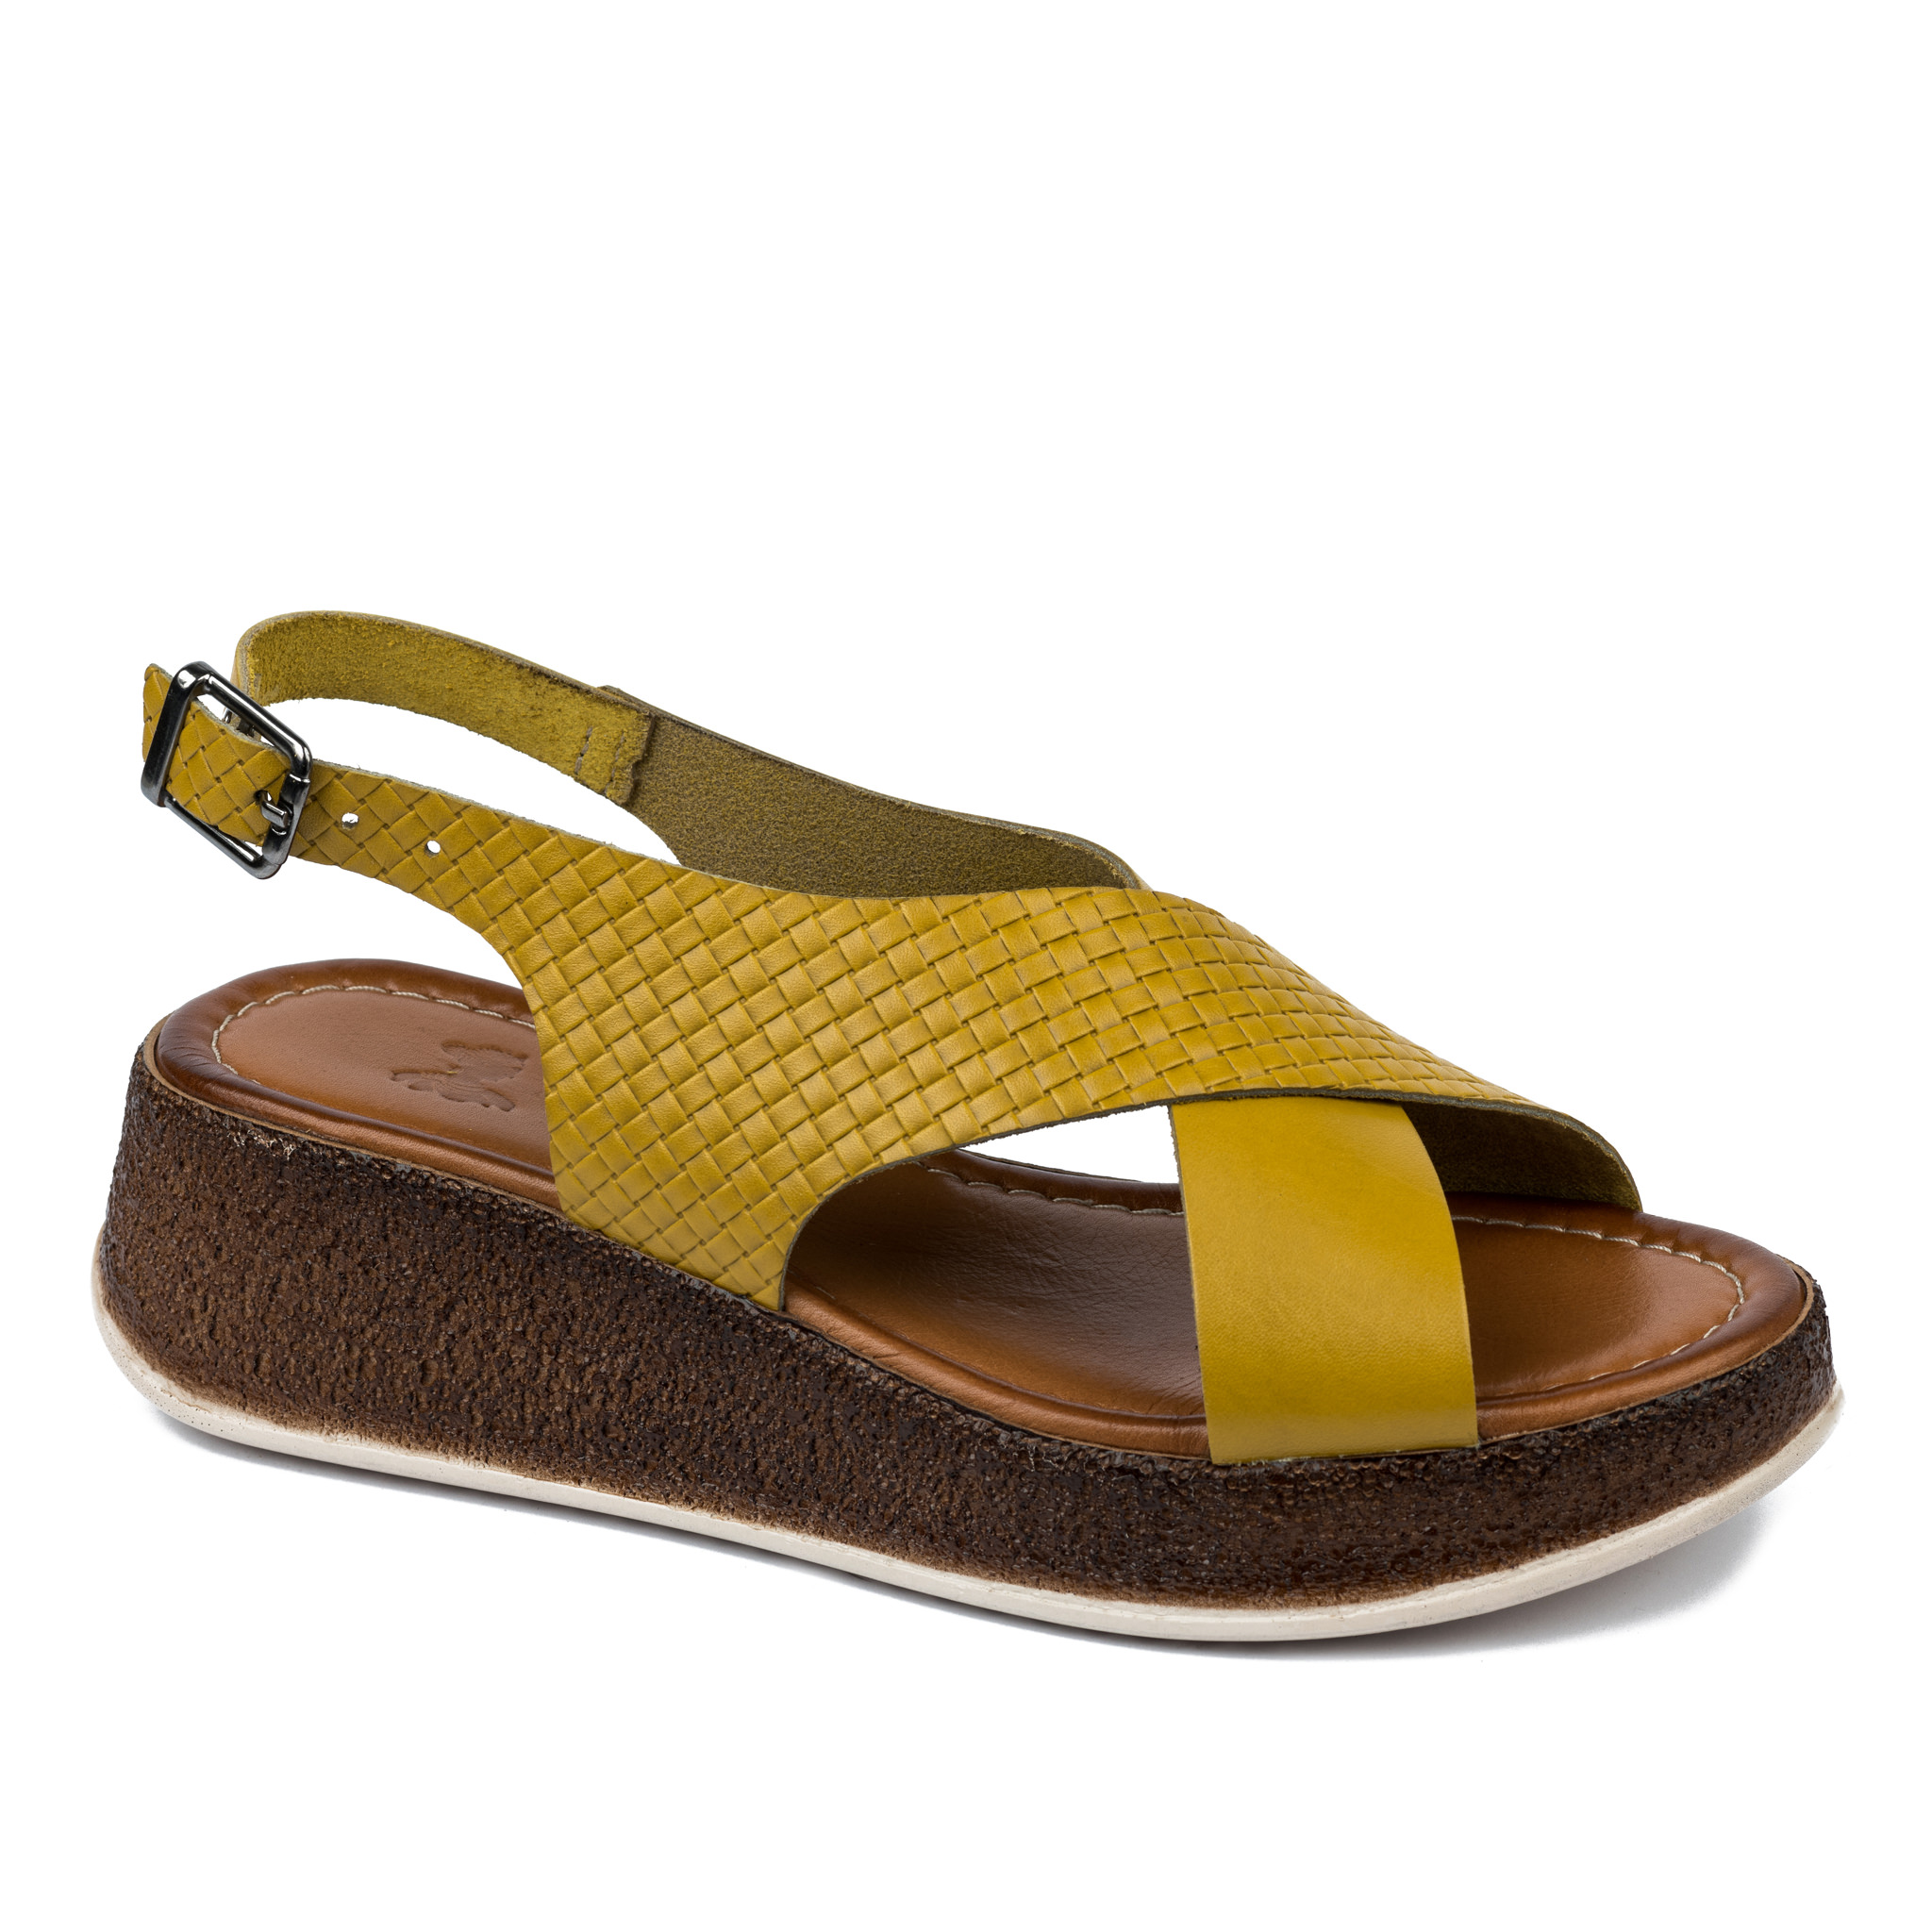 Leather sandals A647 - OCHRE